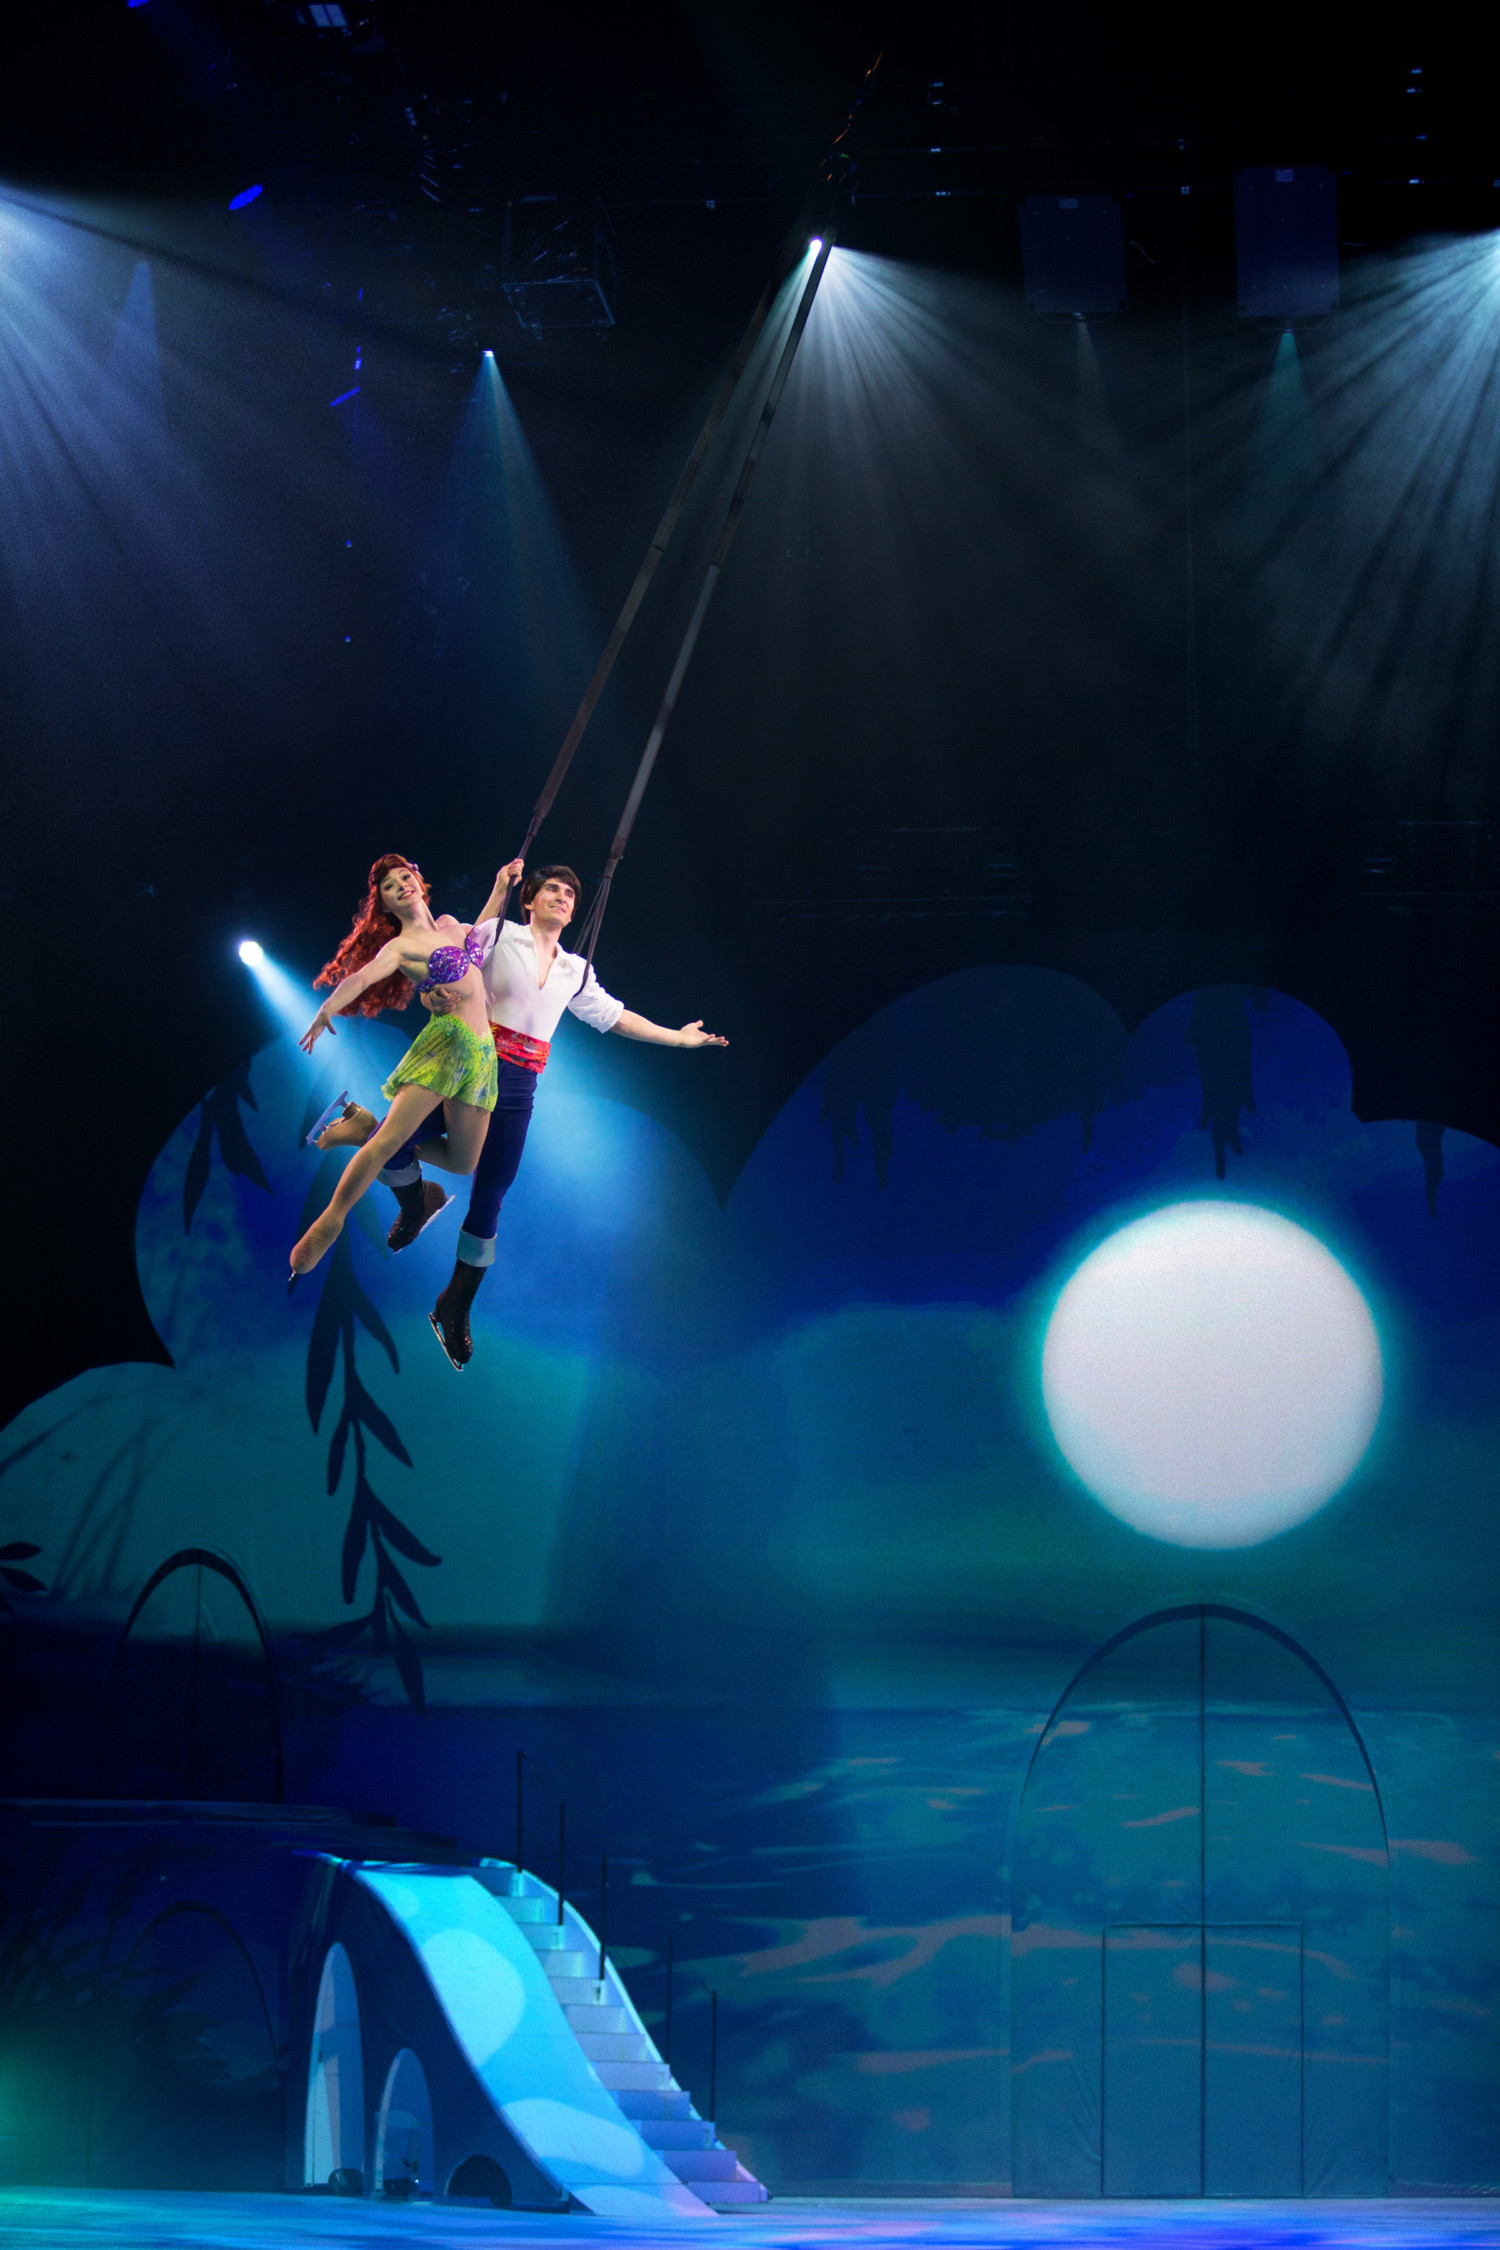 I Went To New Orleans To Experience Disney On Ice: Mickey’s Search Party